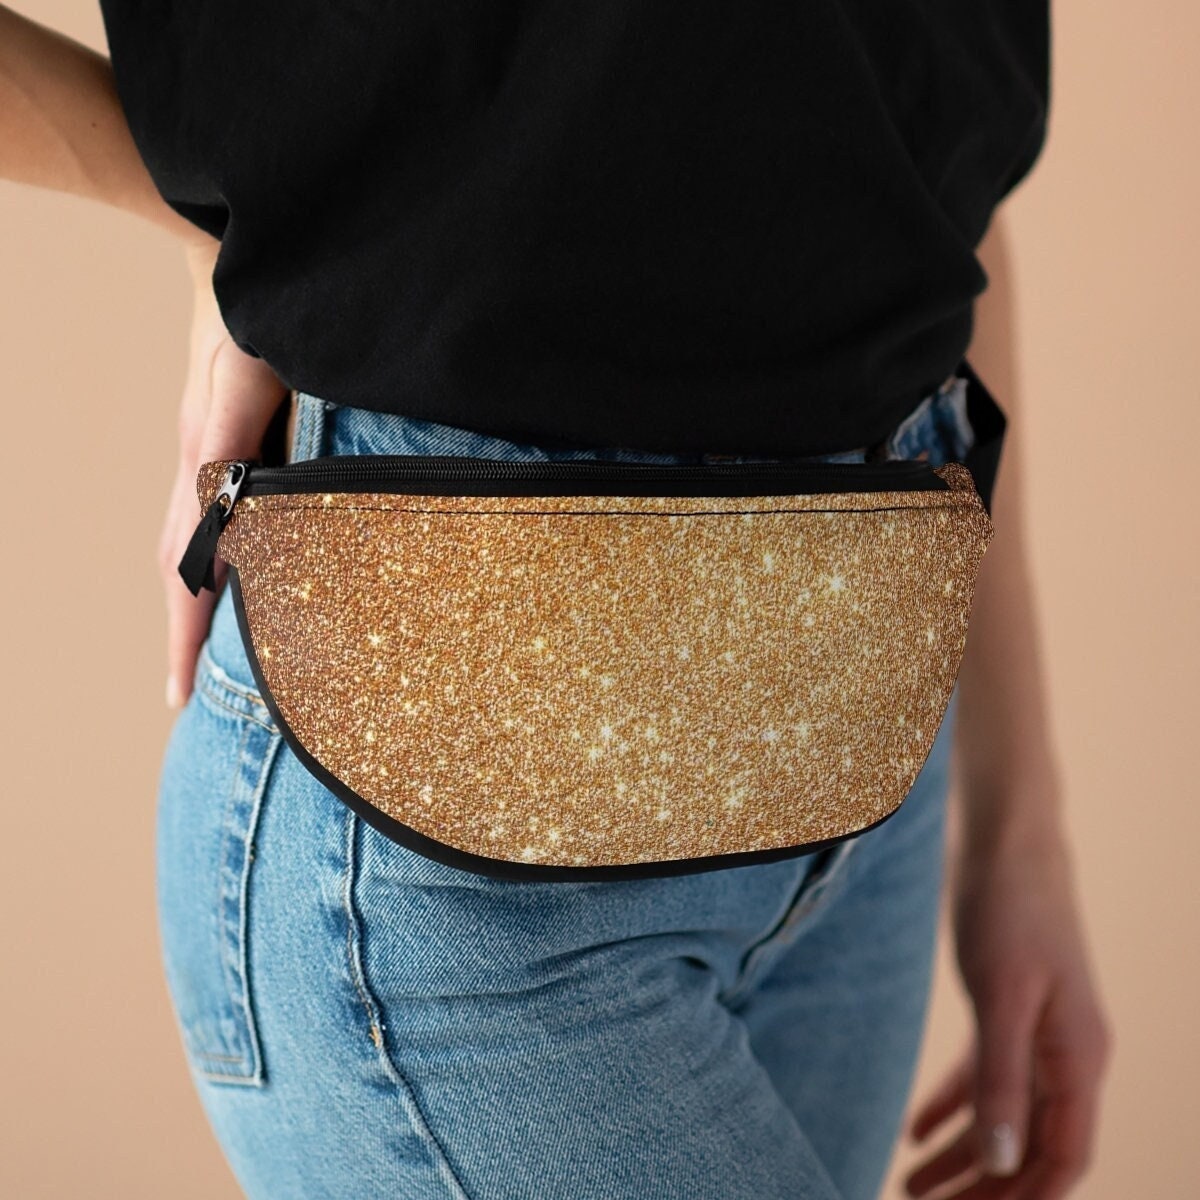 Luxury Rose Gold Sparkly Sequin Pattern Fanny Pack by SweetBirdieStudio